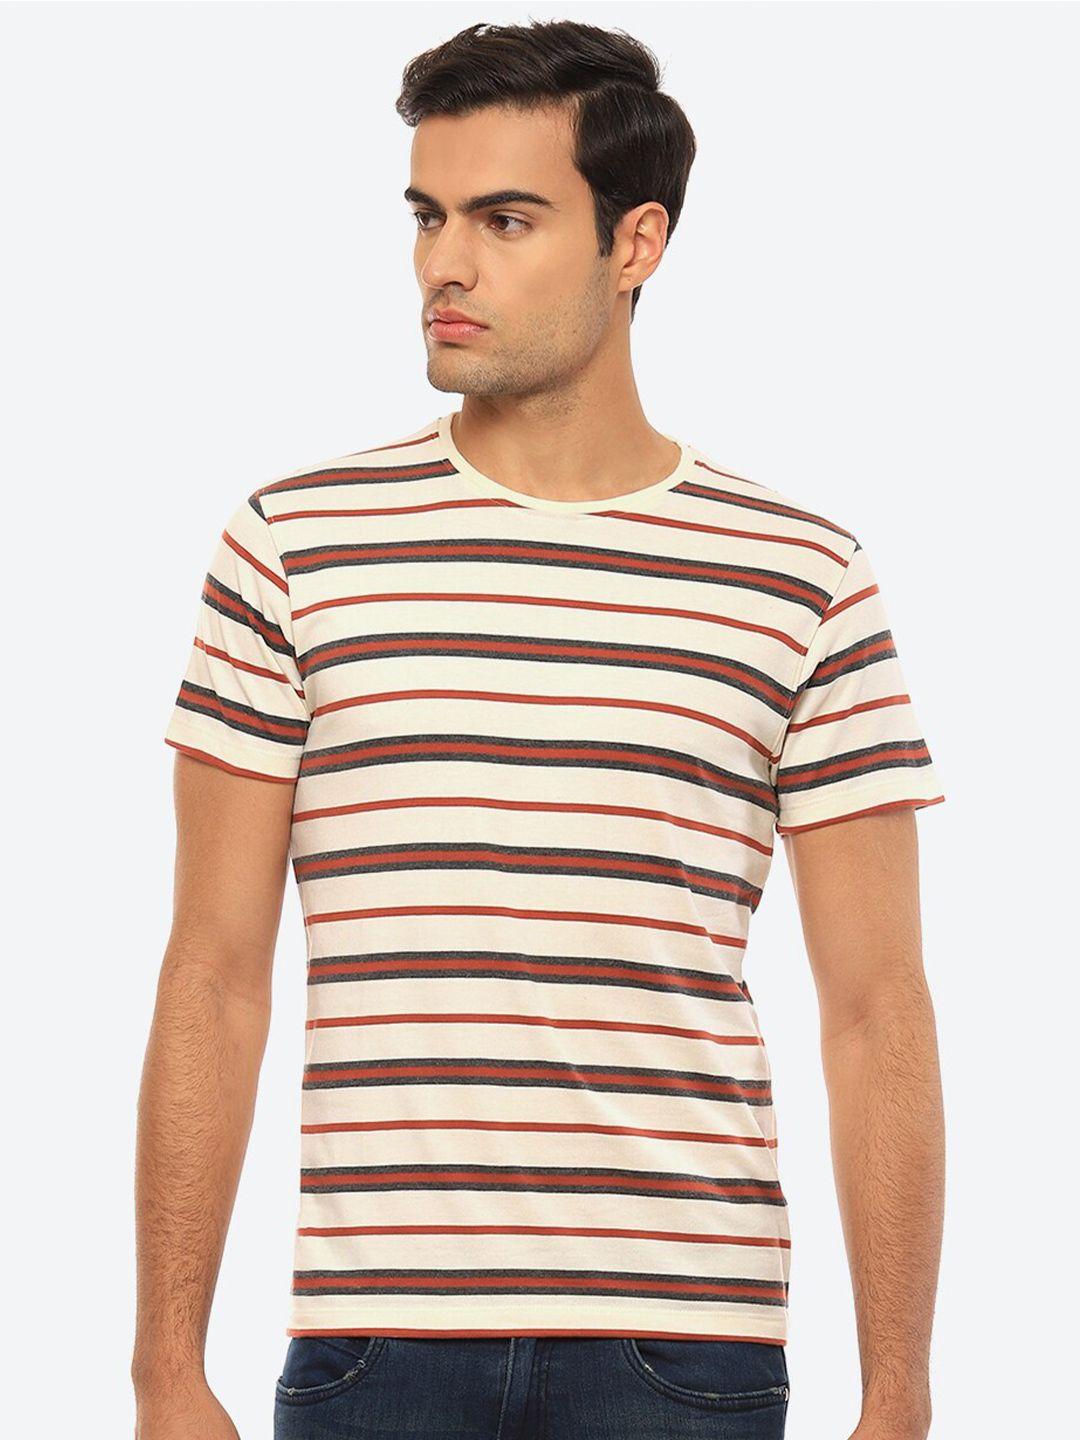 2bme striped round neck short sleeves pure cotton t-shirt